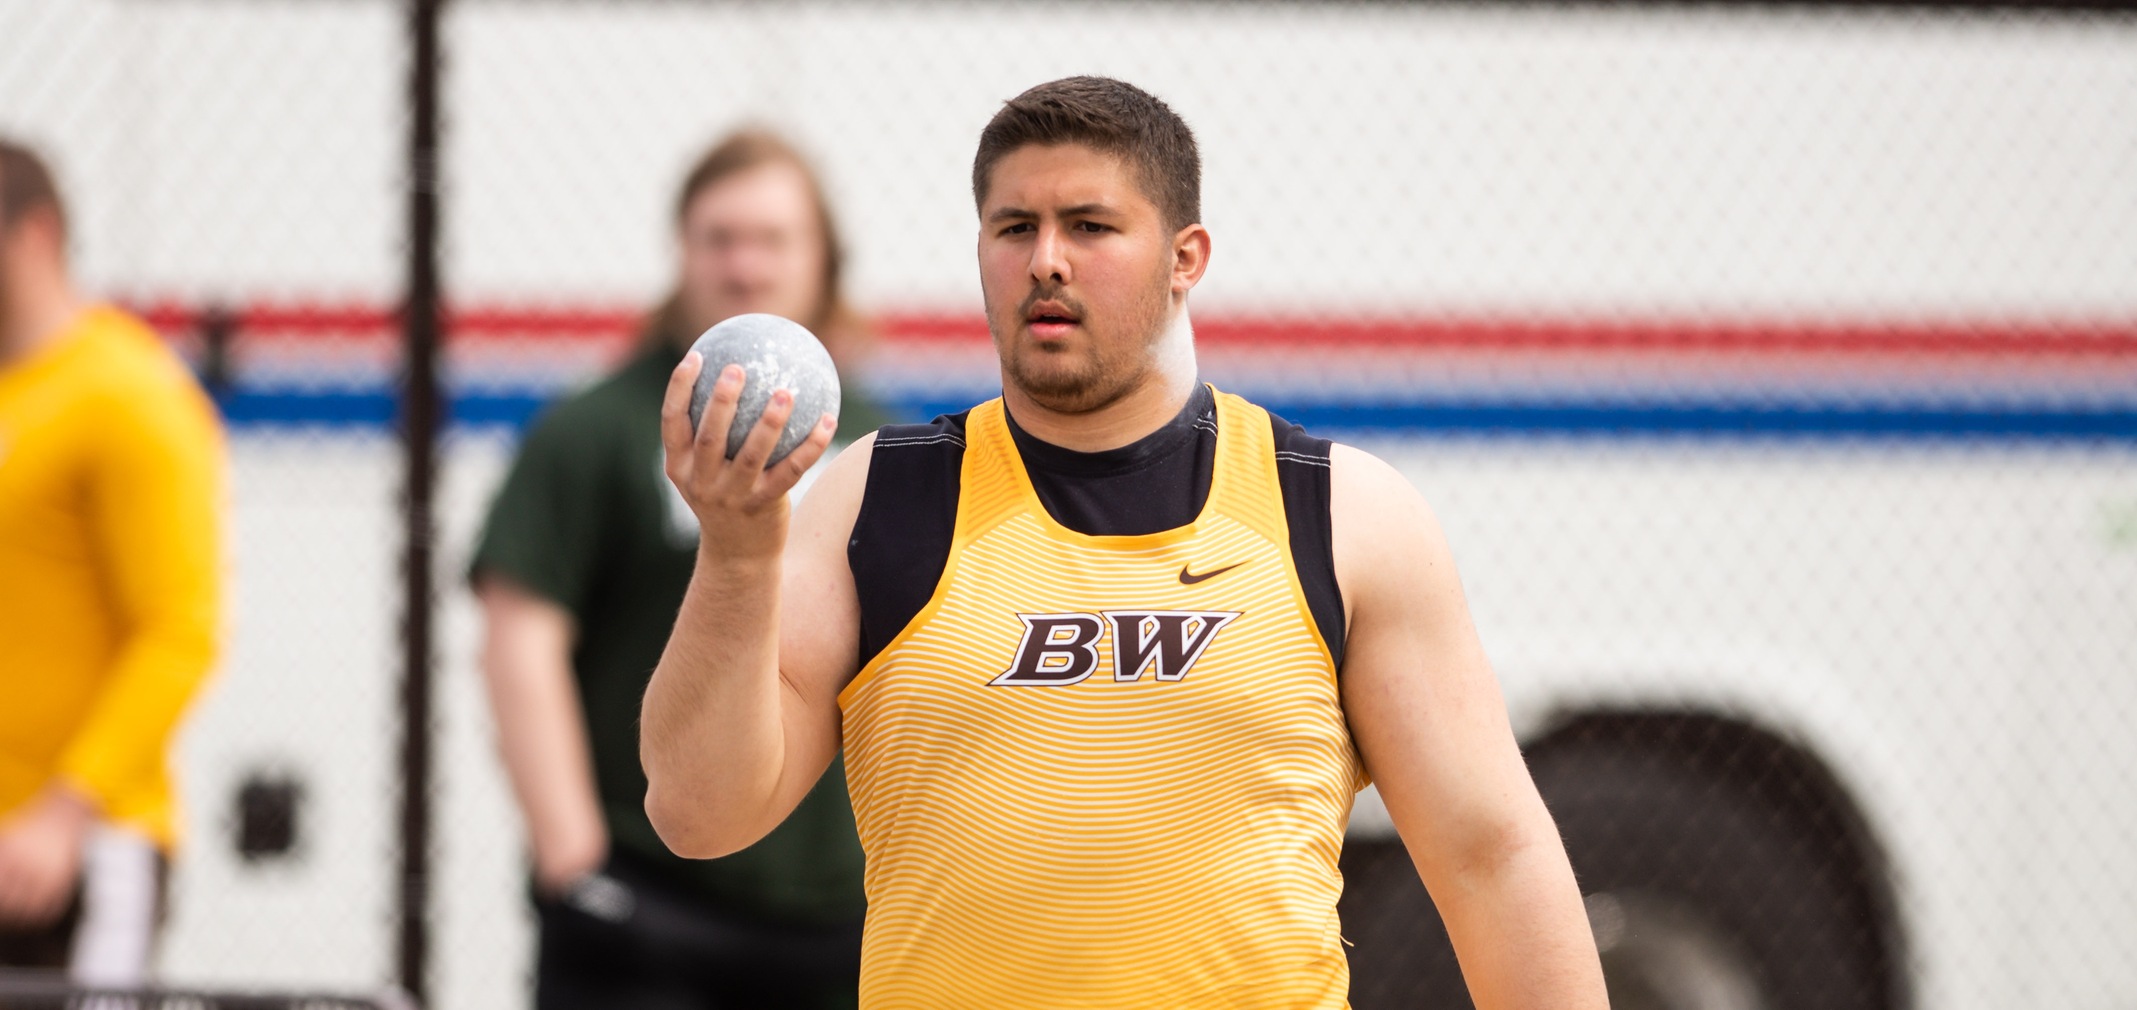 Sophomore All-OAC thrower Ted Achladis won the discus event at the 49th Annual Sparky Adams Invitational (Photo courtesy of Jesse Kucewicz)